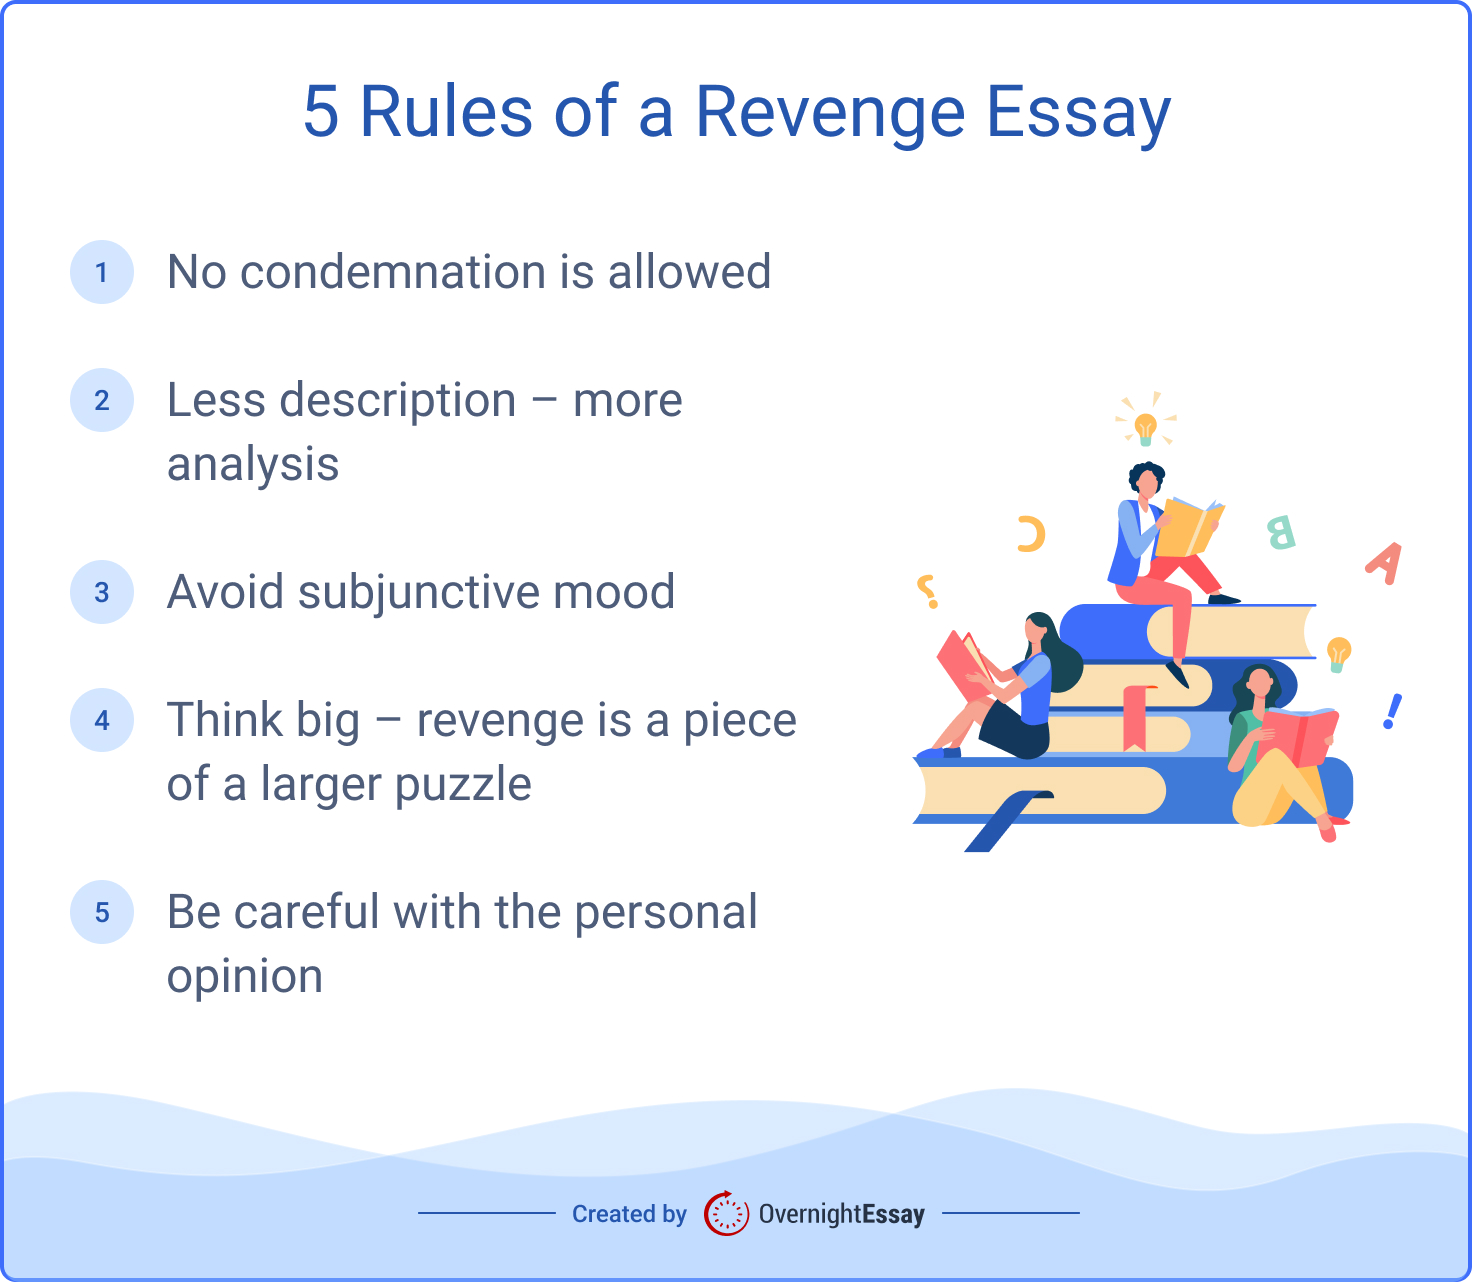 The picture contains five rules of  a revenge essay writing.